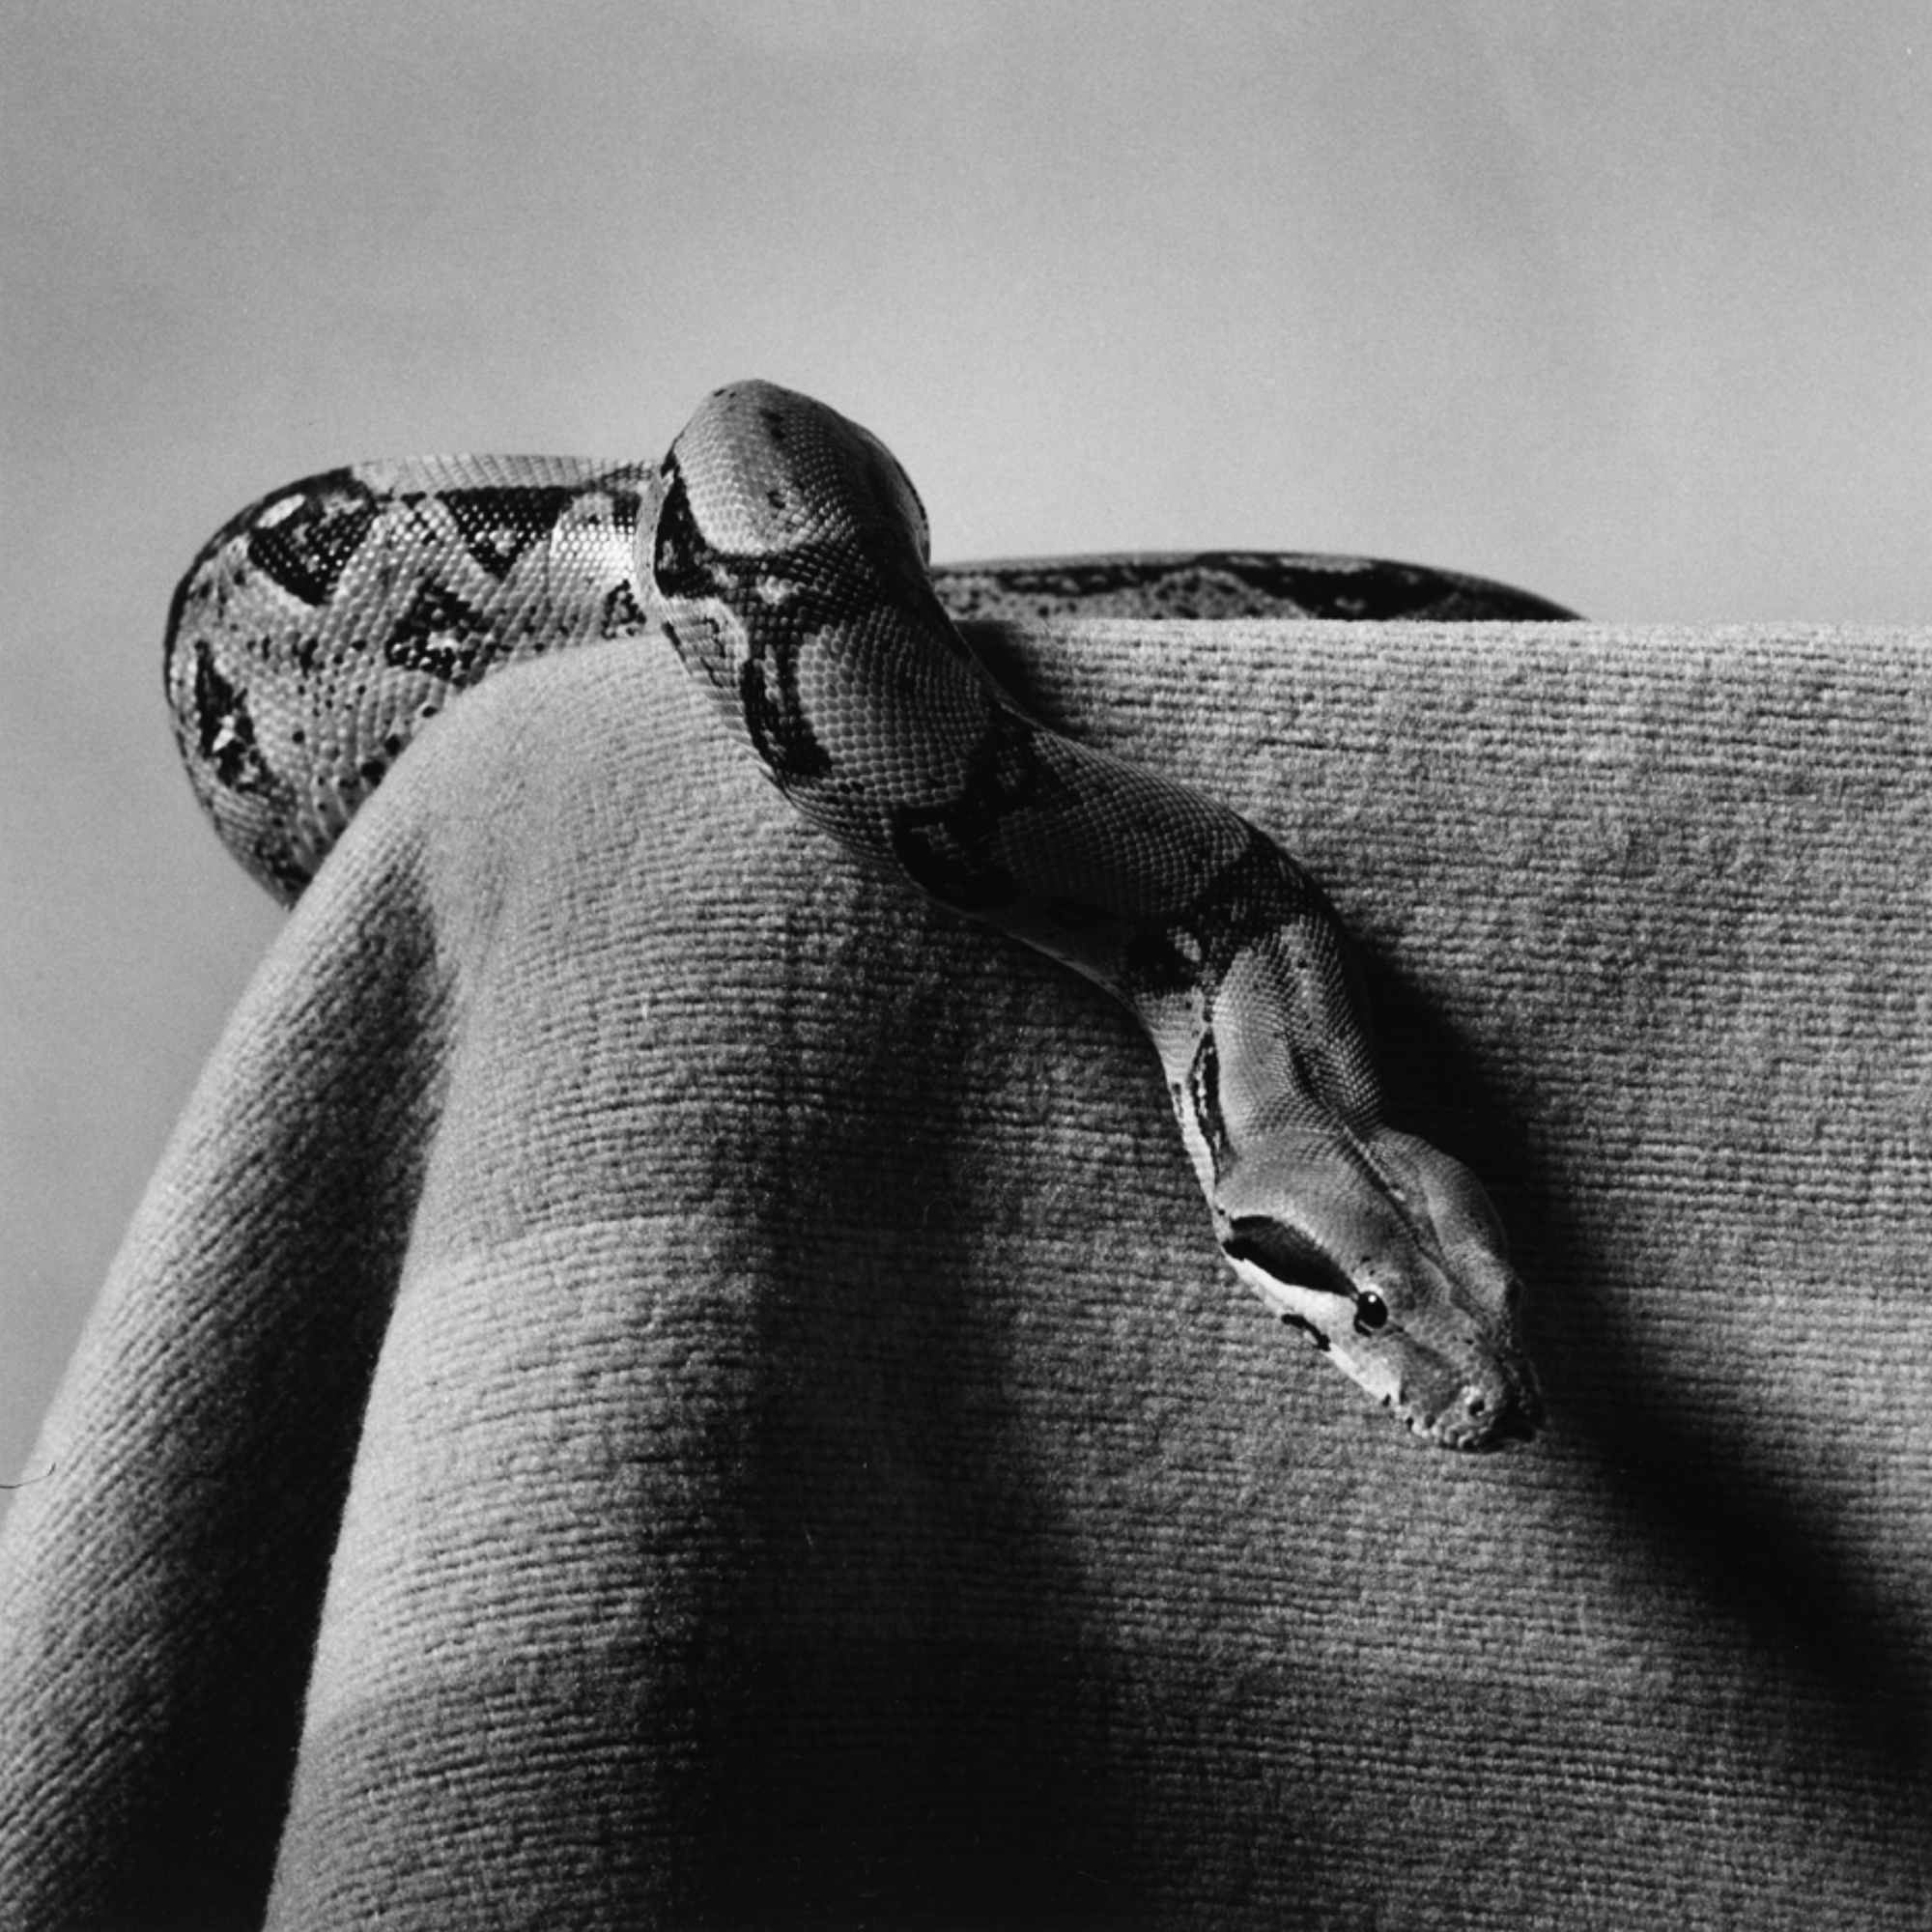 Black and white photograph of a snake on corner of blanket covered table